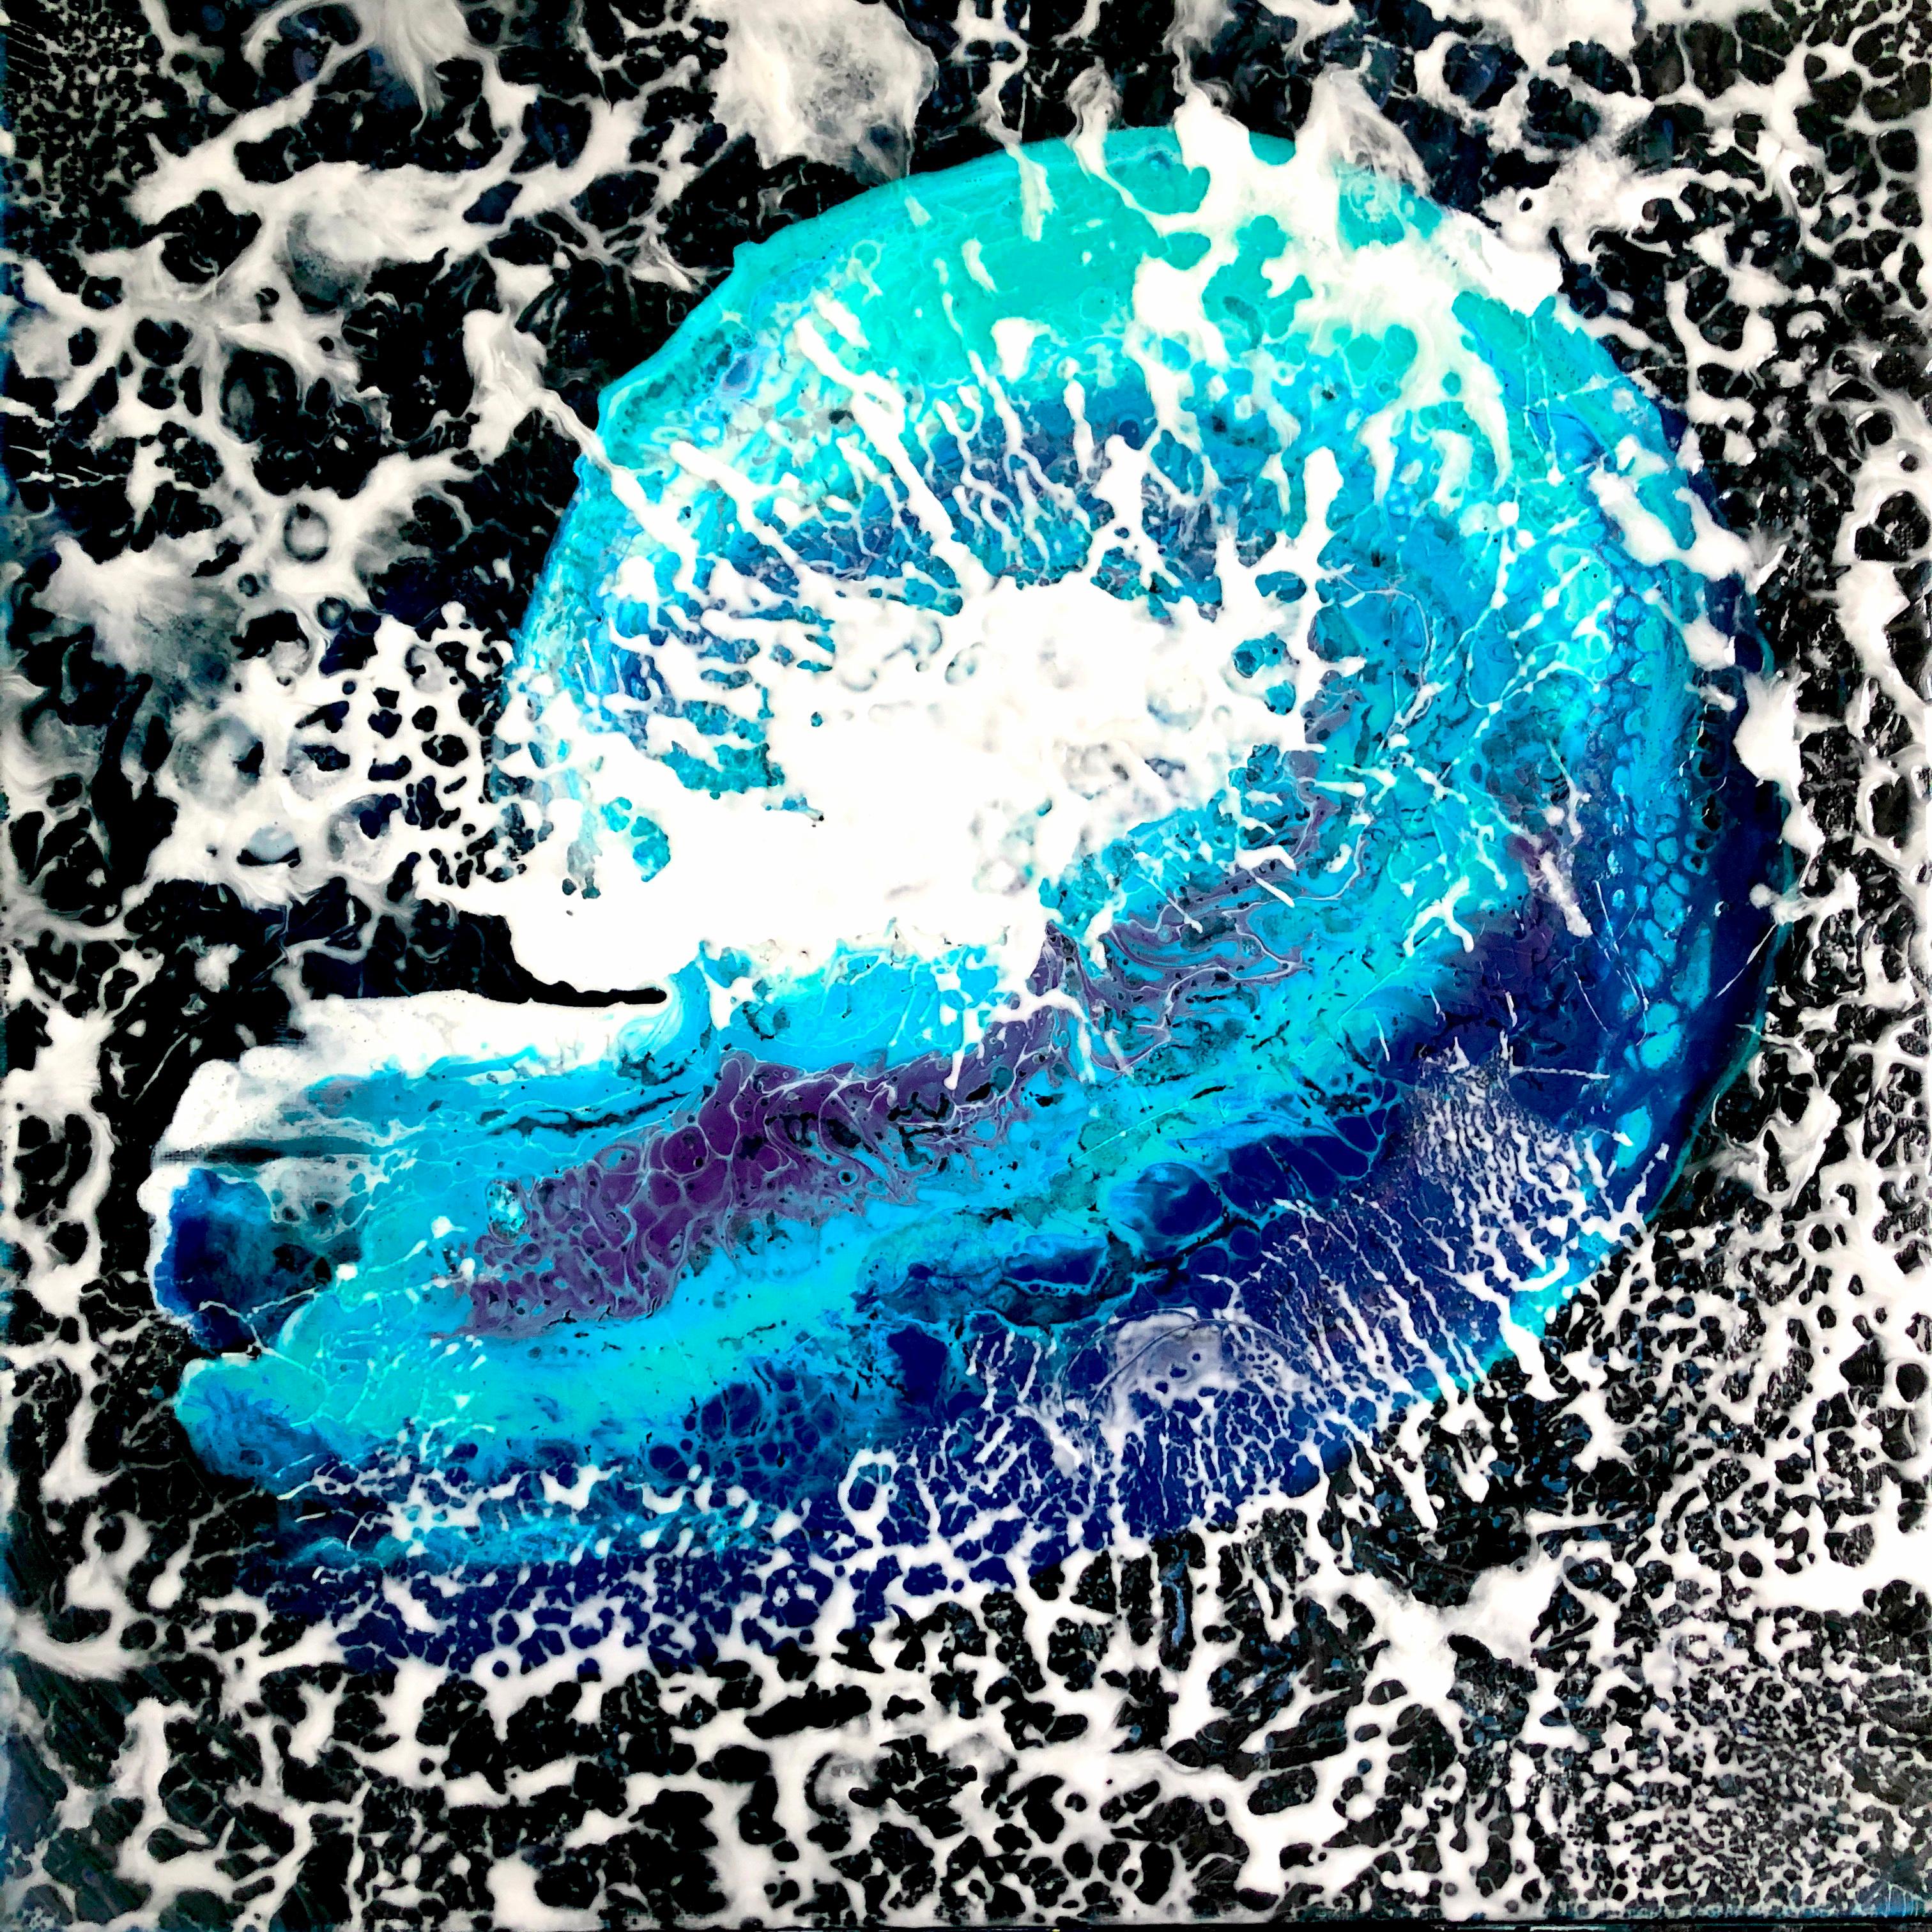    Baby Wave. Abstract expressionism. Sea / Water / Ocean /40*40 cm. - Mixed Media Art by Vik Schroeder 